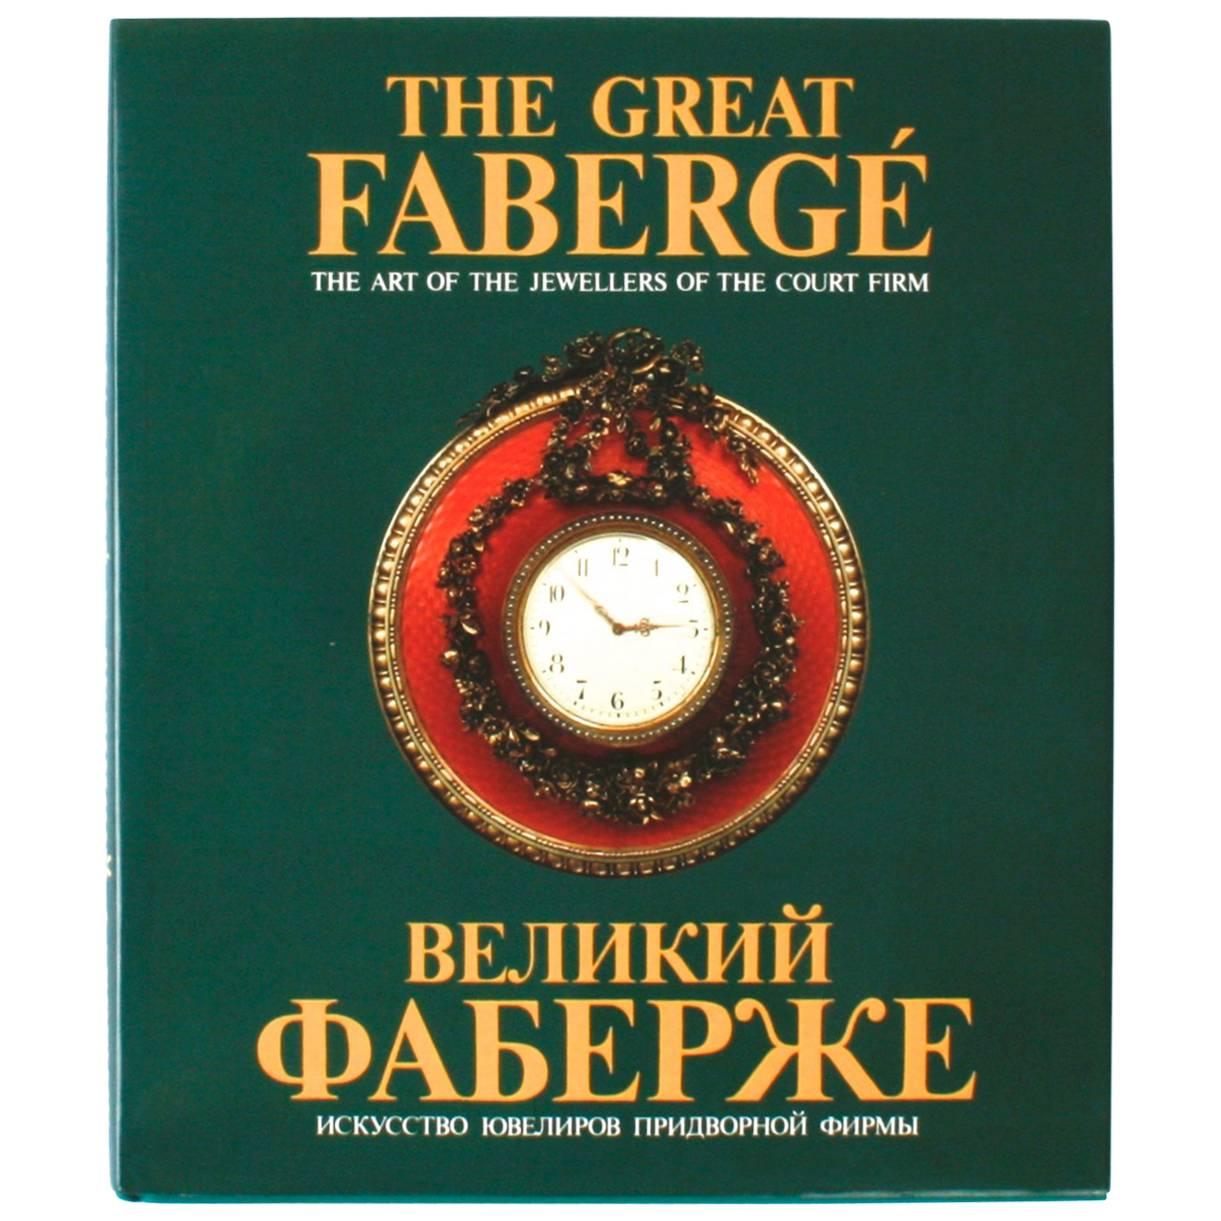 Great Fabergé, the Art of the Jewellers of the Court Firm, First Edition